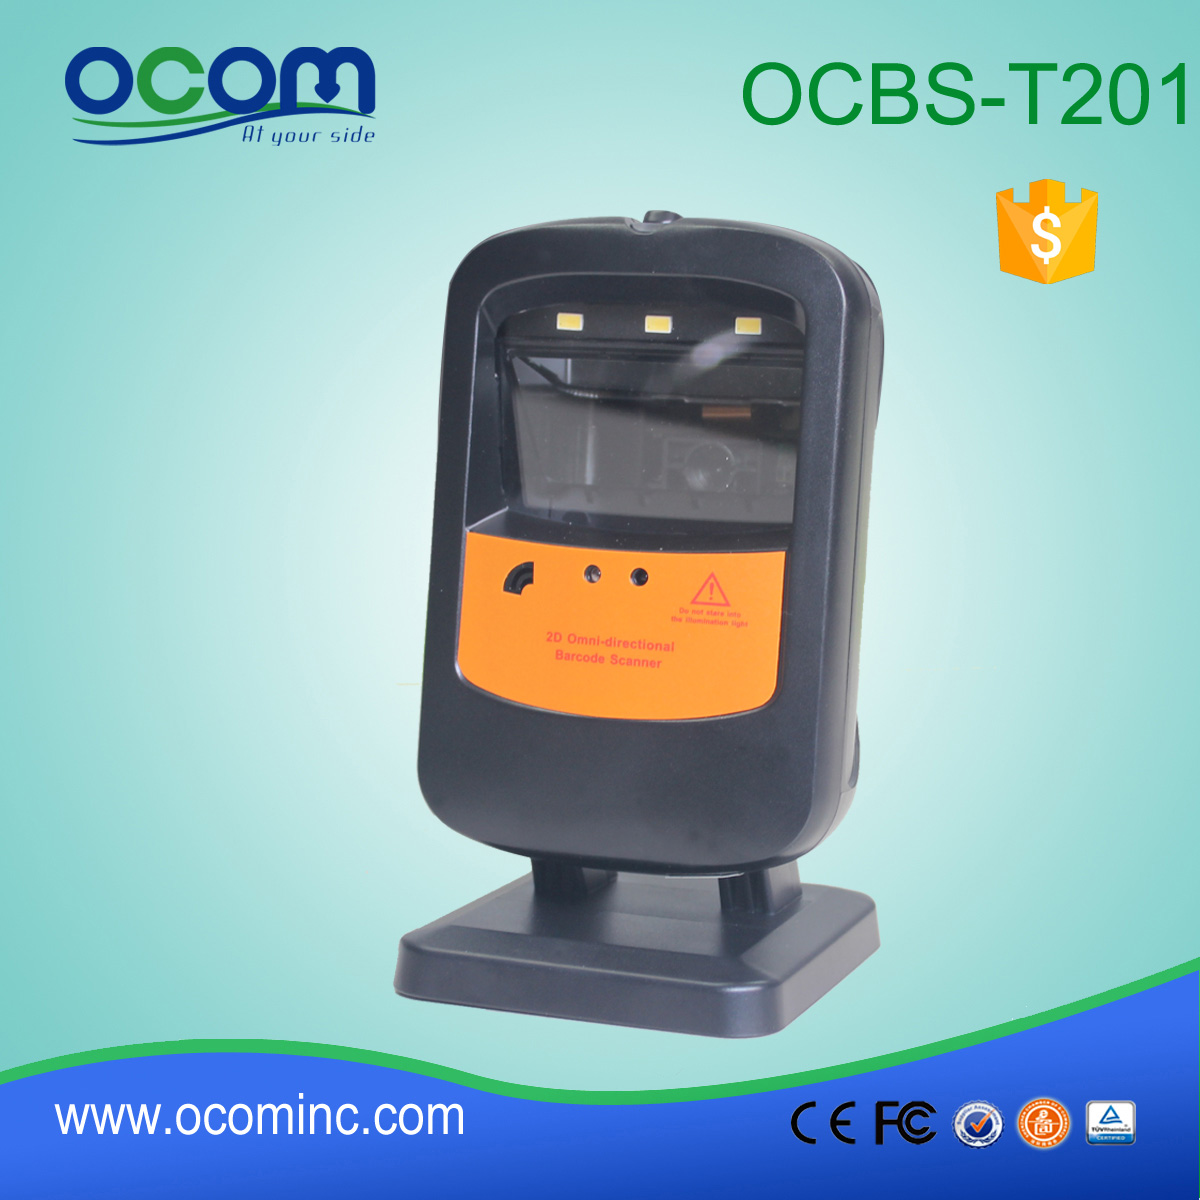 2015 plus récent 2D Omni-directionaI image Barcode Scanner OCBS-T201